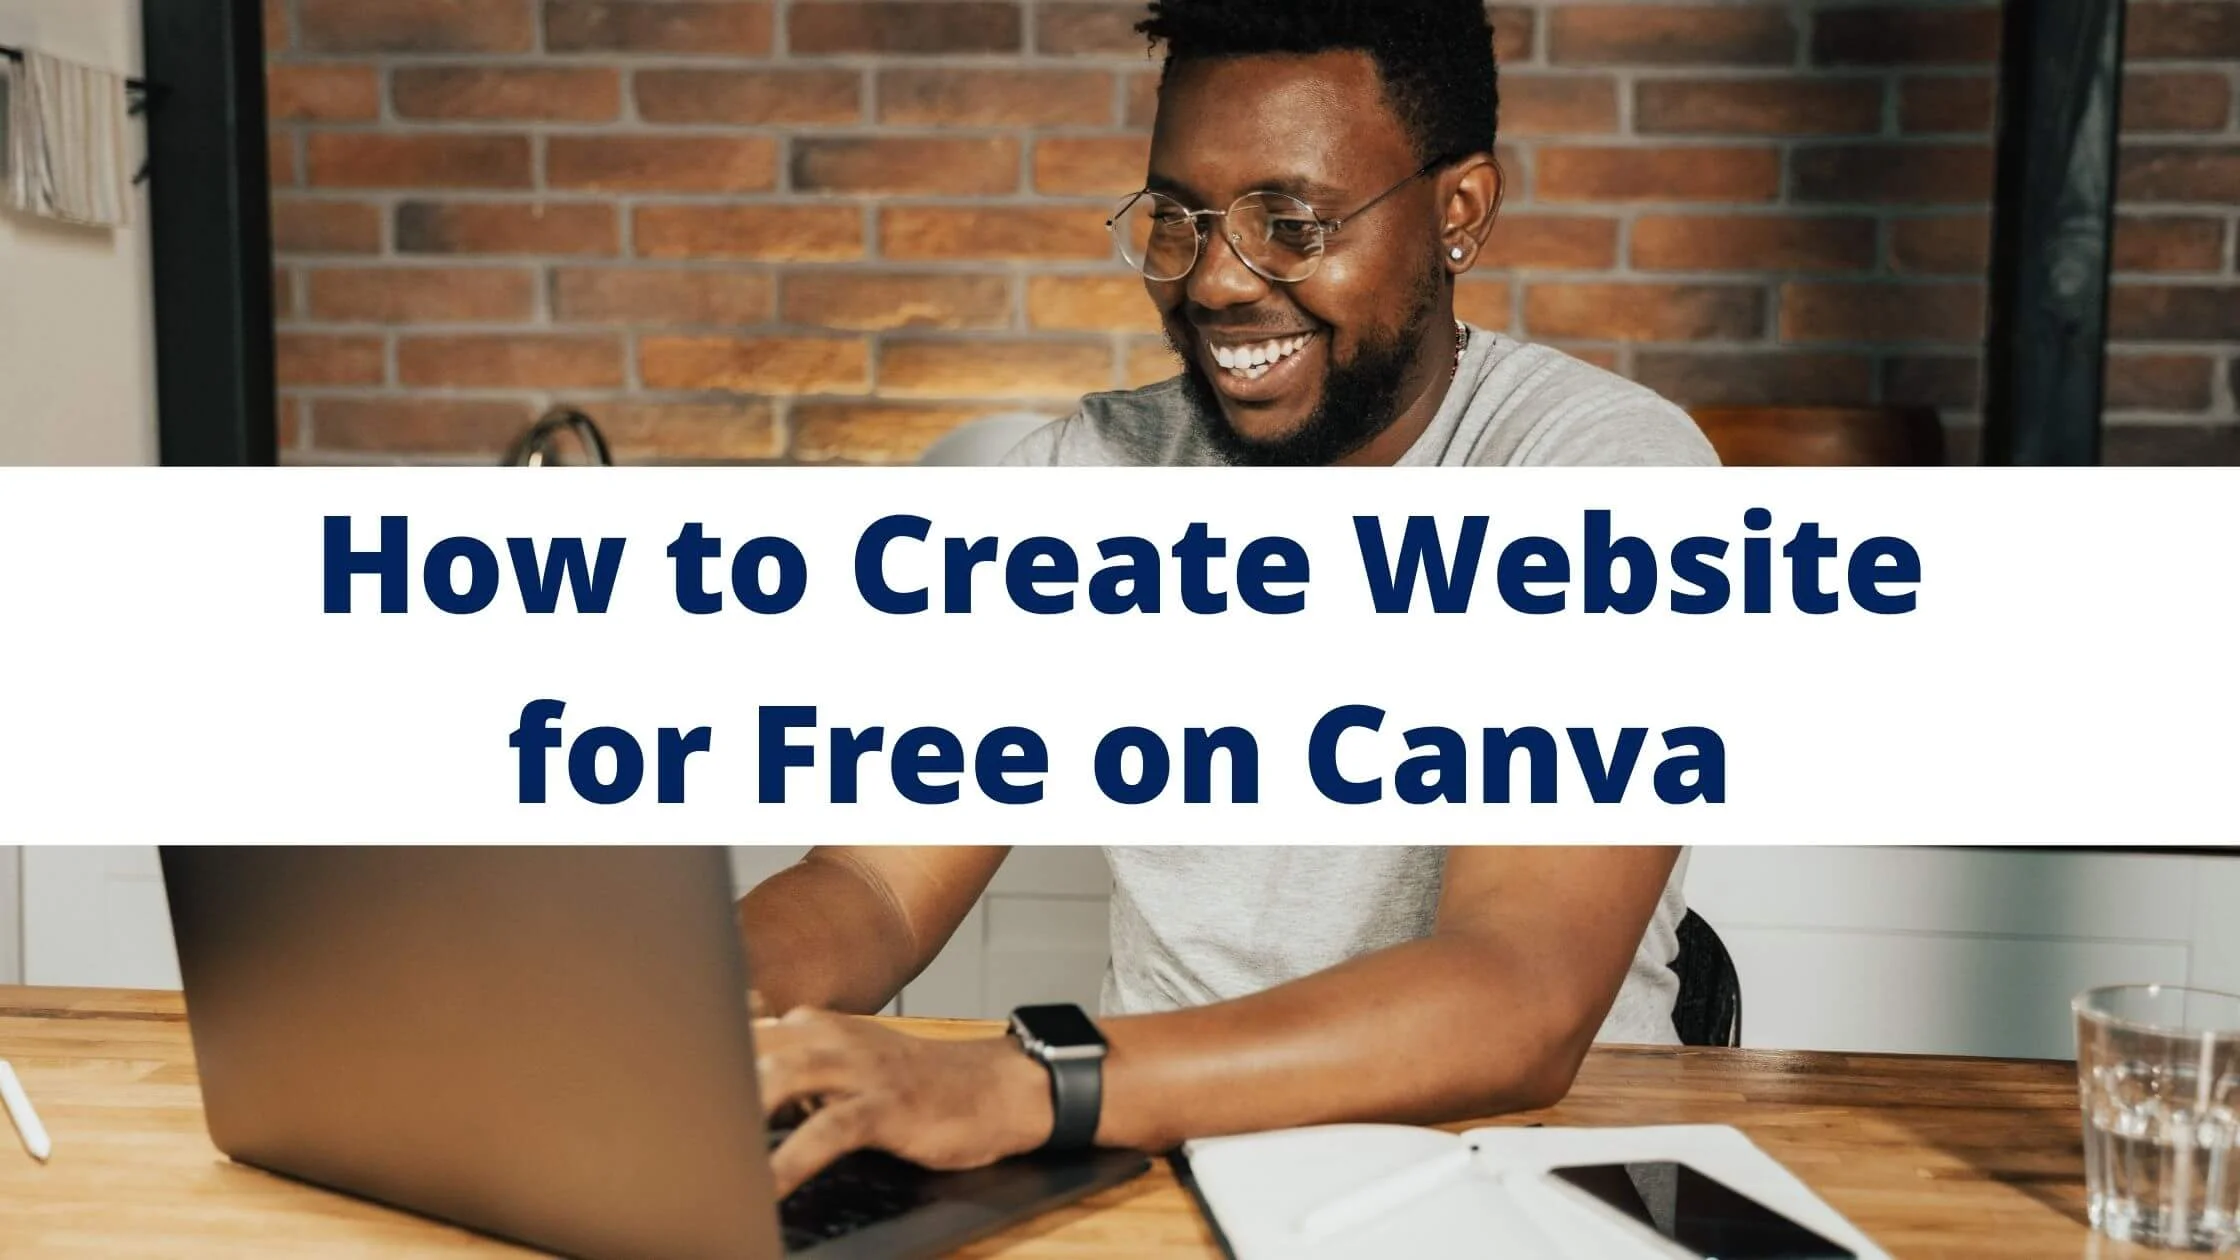 Create Website for Free on Canva